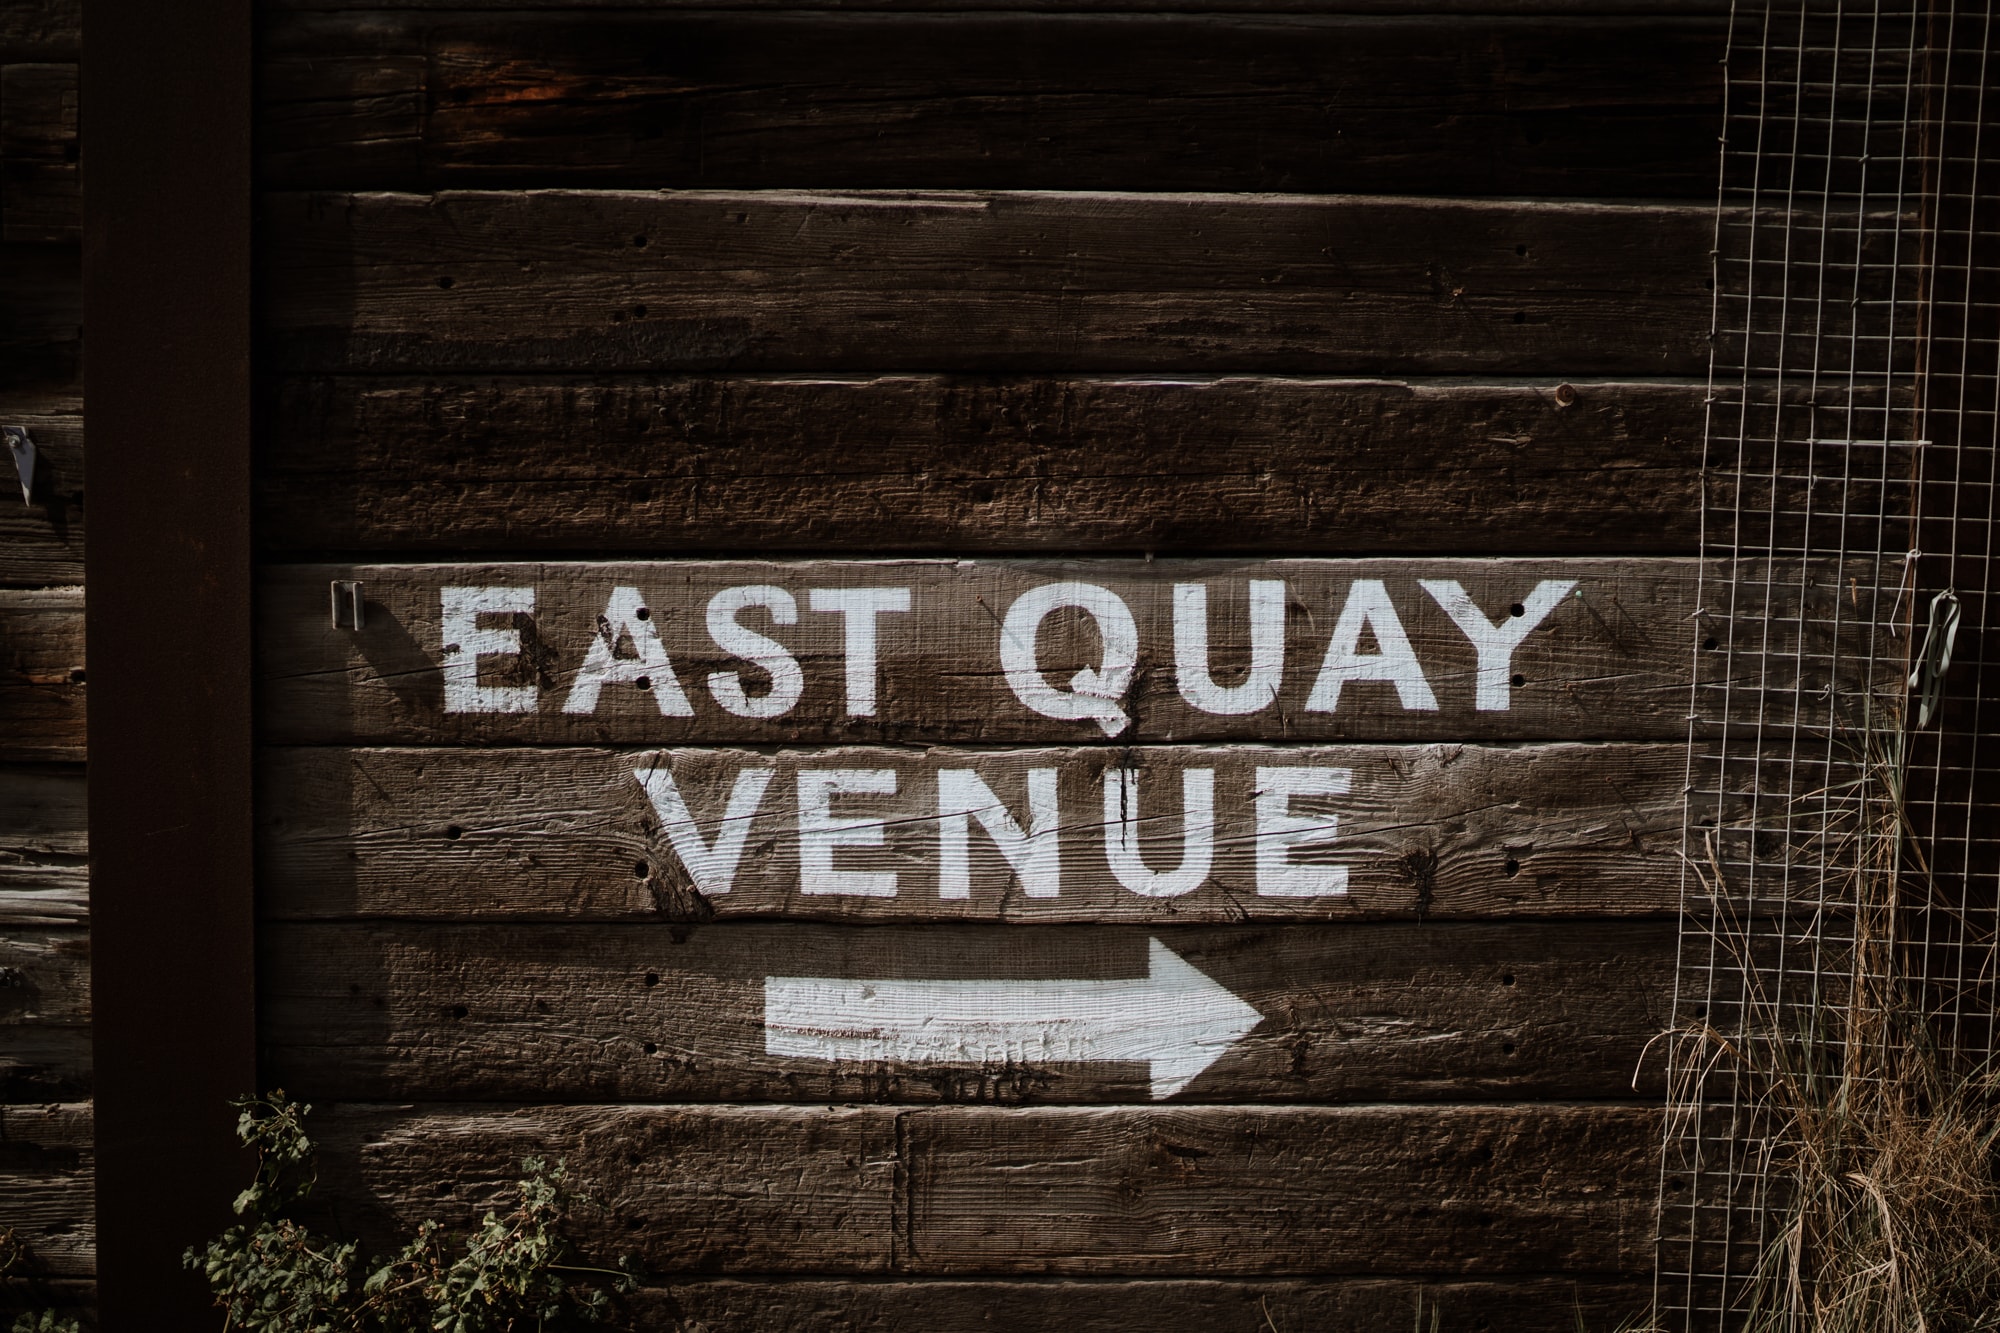 Wall made of black sleepers with East Quay Venue written in white paint